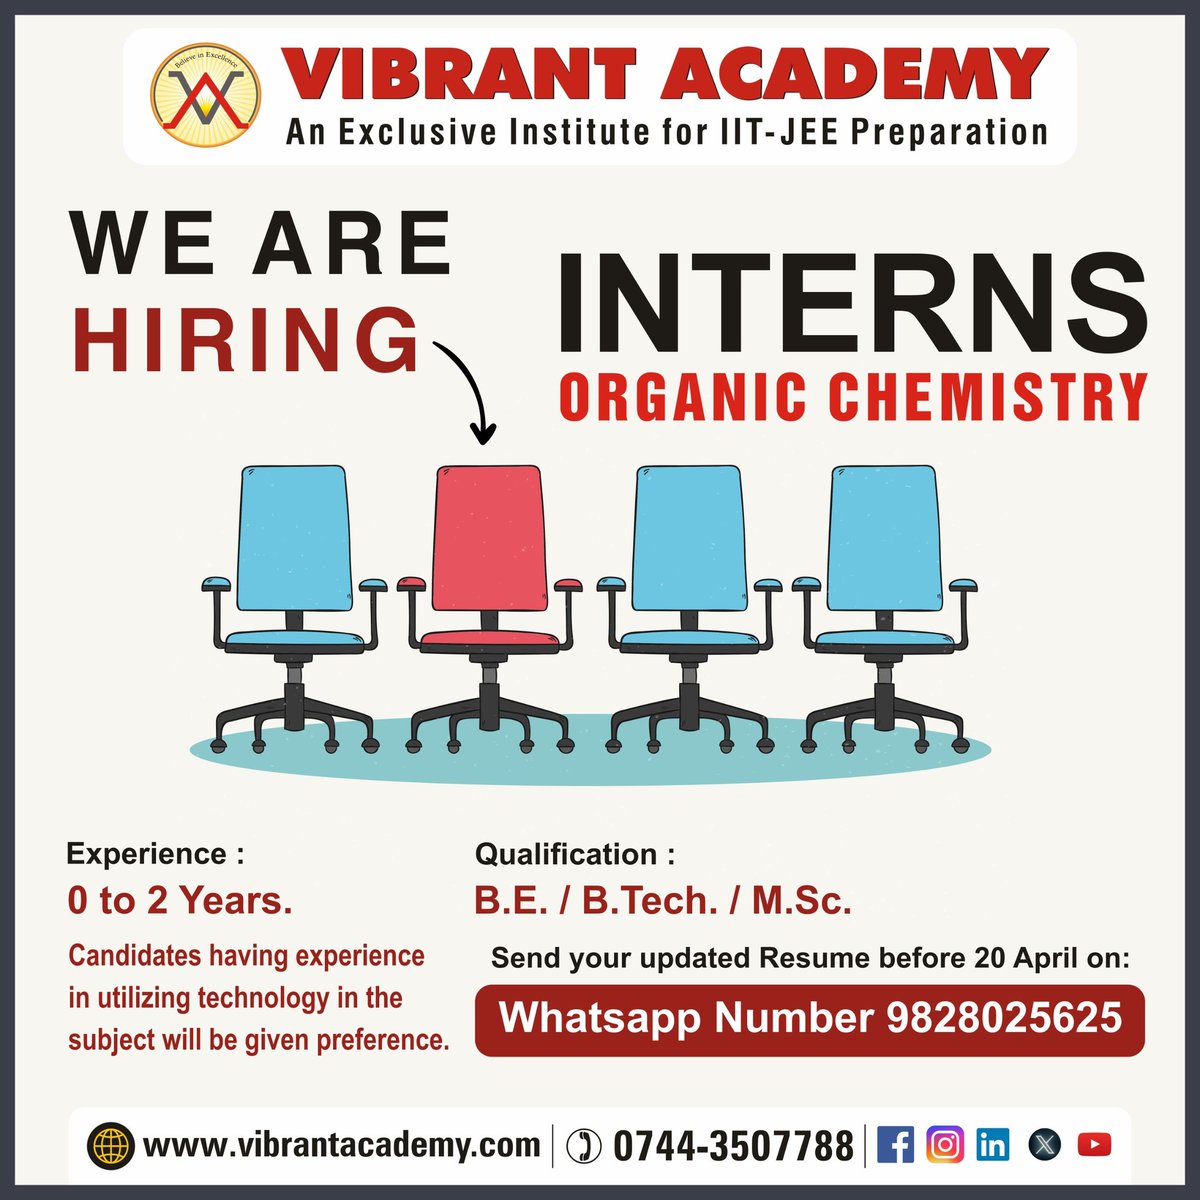 📣Job Alert 
👉We are Hiring 
👩‍💻 INTERNS ORGANIC CHEMISTRY
👉Experience 0 - 2 Years
👉Send your updated Resume before 20 April on: Whatsapp Number  +91 9828025625

#vibrantacademyacademy #kotacoaching #jobsearching #jobsearch #job #jobopportunity #jobsearch